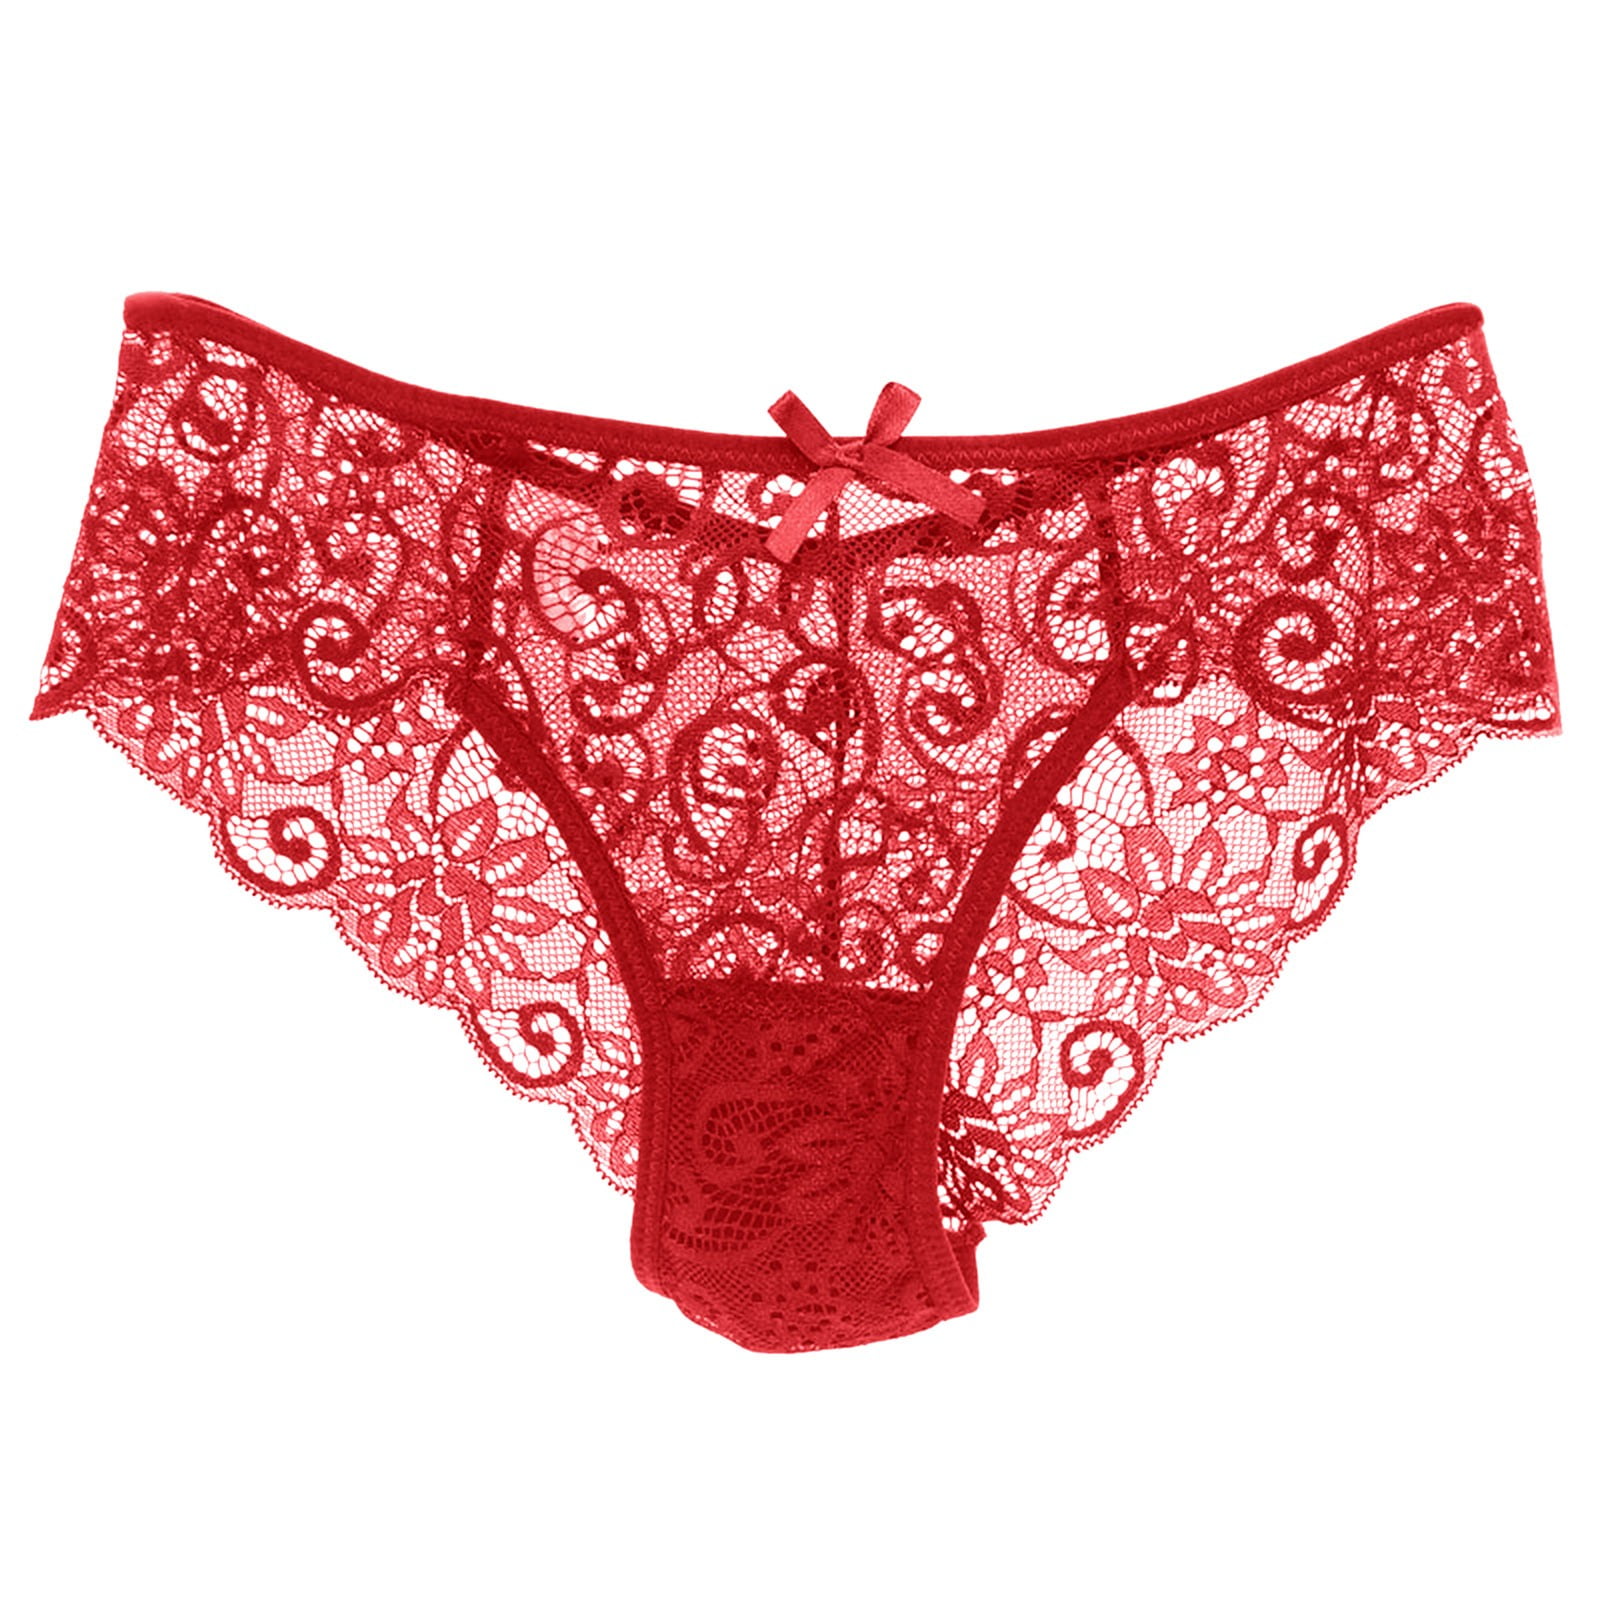 Adored by Adore Me Women's Chelsey Payal Cheeky Underwear, 2-Pack